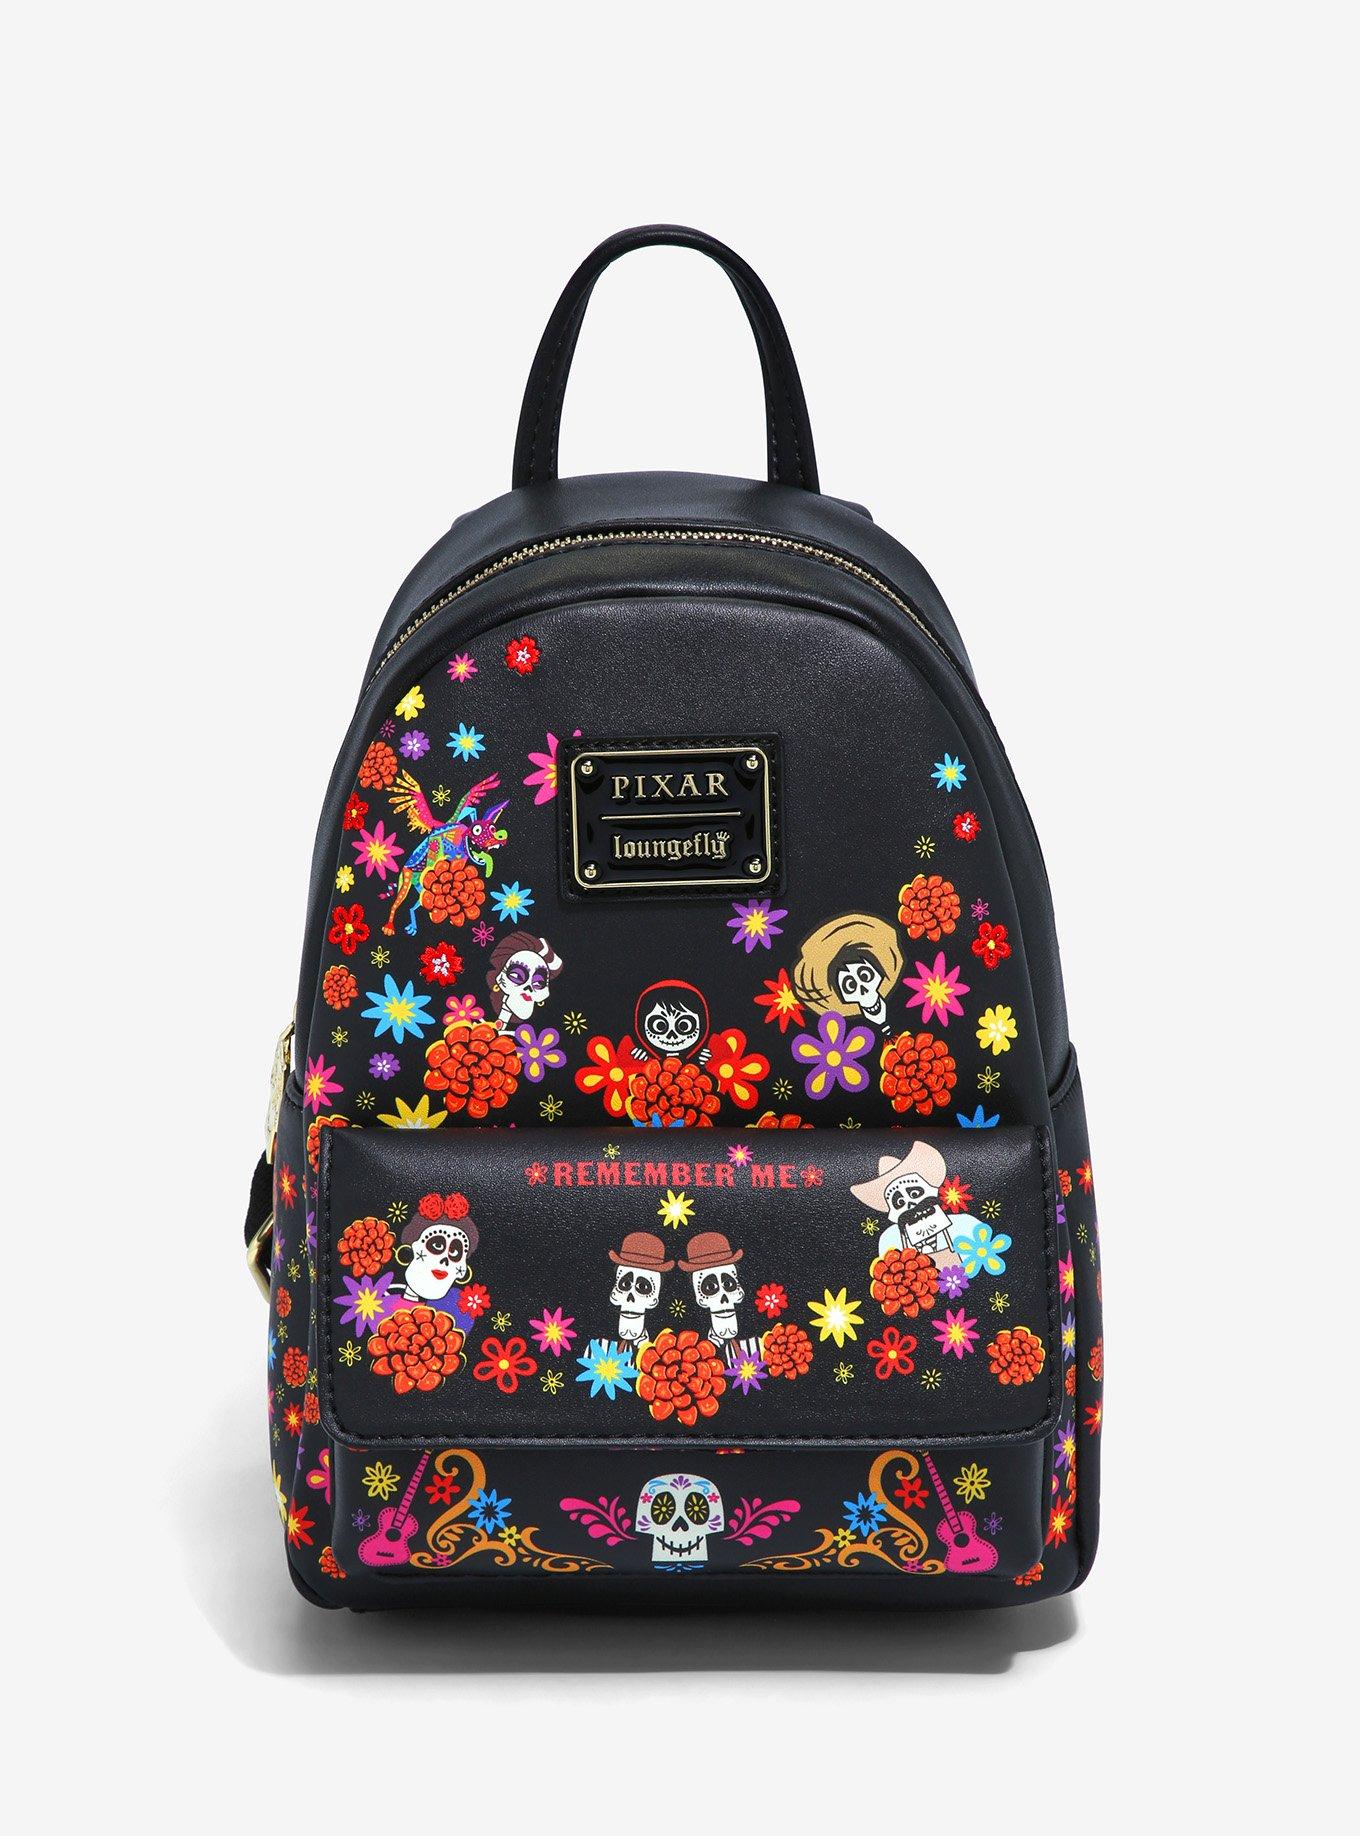 Loungefly Disney Pixar Coco Land of the Dead Family Mini Backpack -  BoxLunch Exclusive